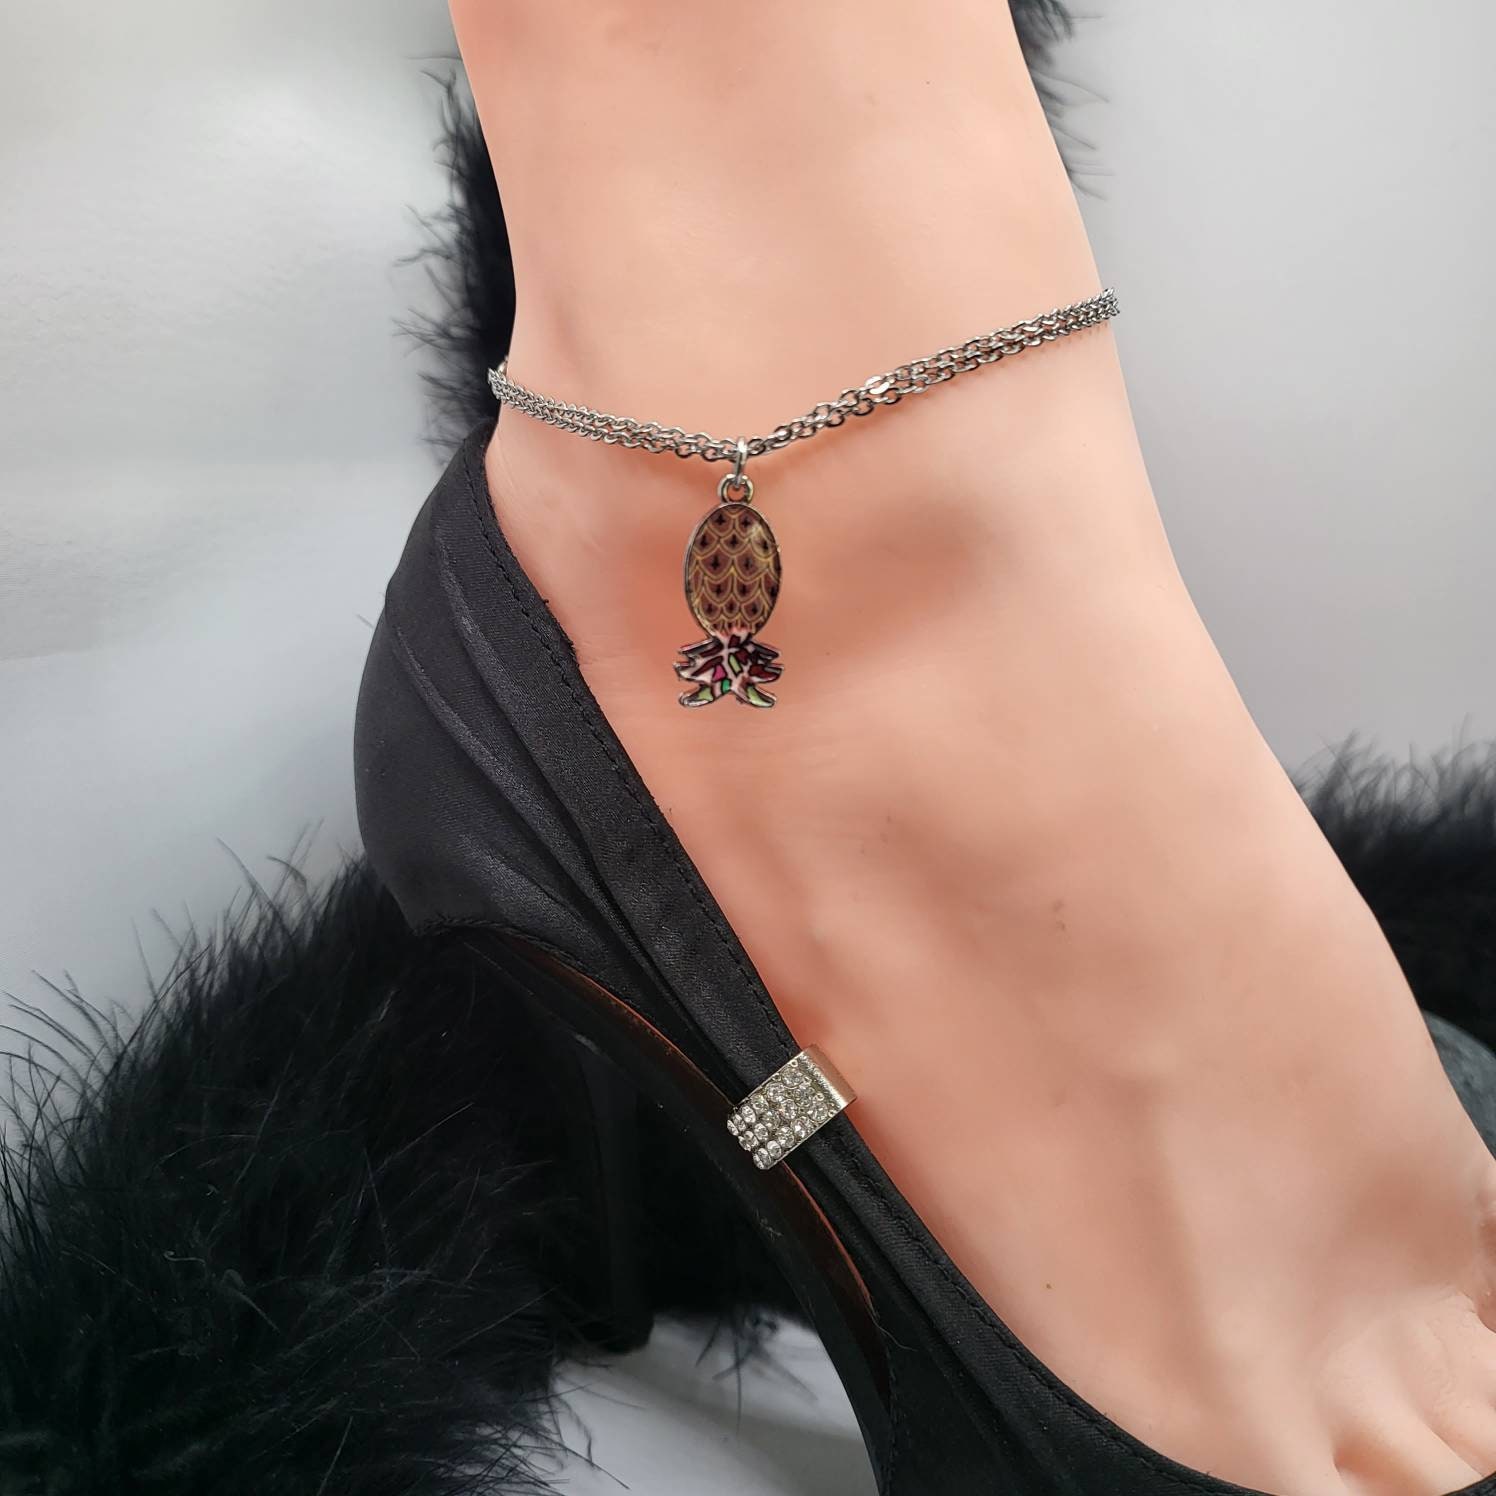 Ankle Bracelet Cuckold picture pic